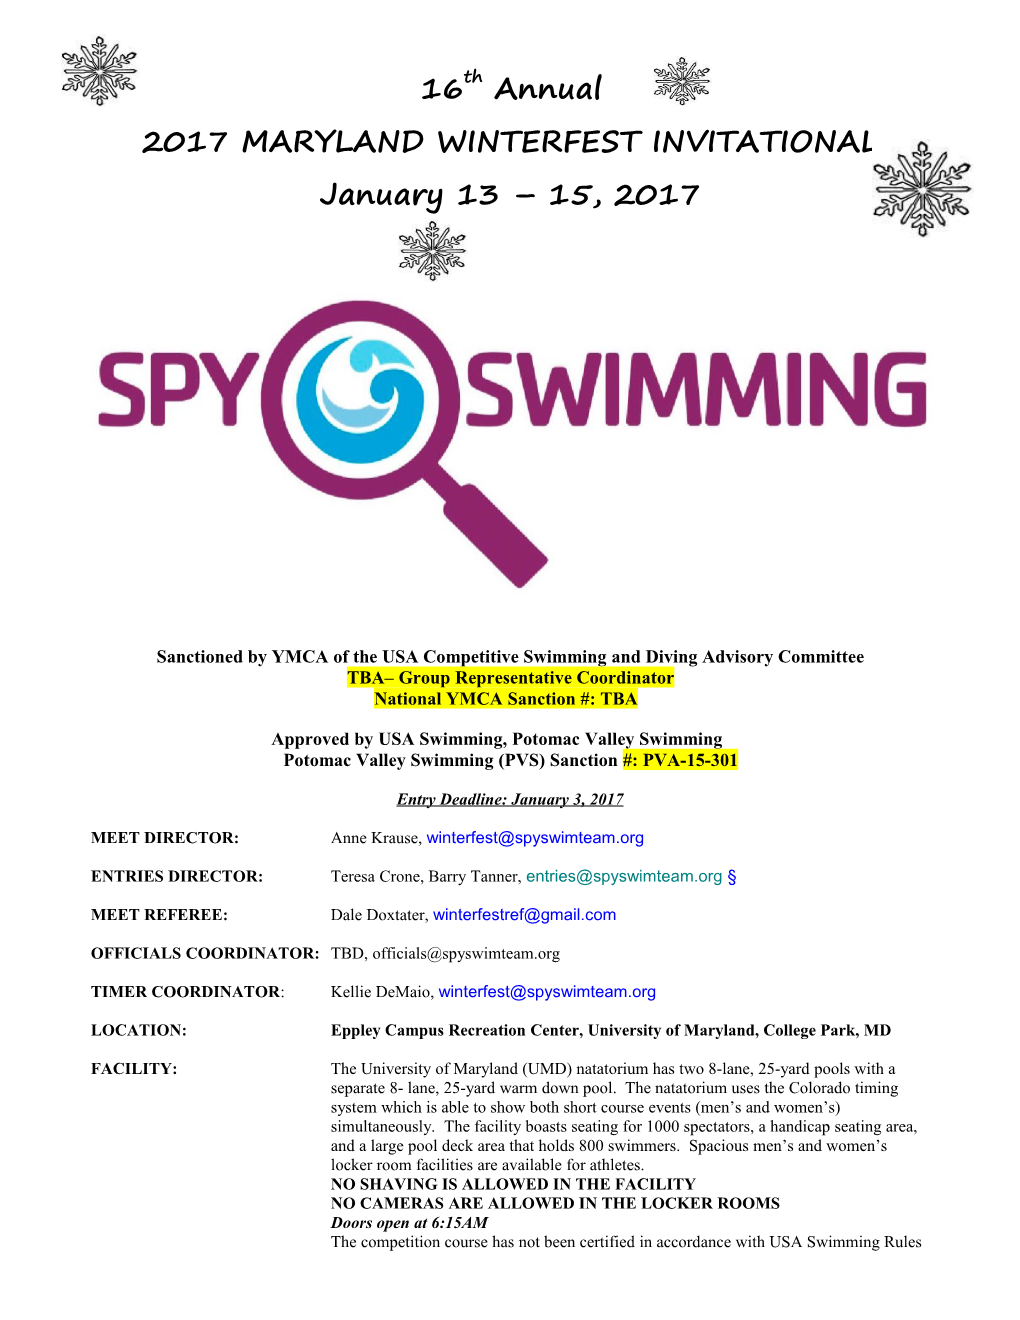 Sanctioned by YMCA of the USA Competitive Swimming and Diving Advisory Committee